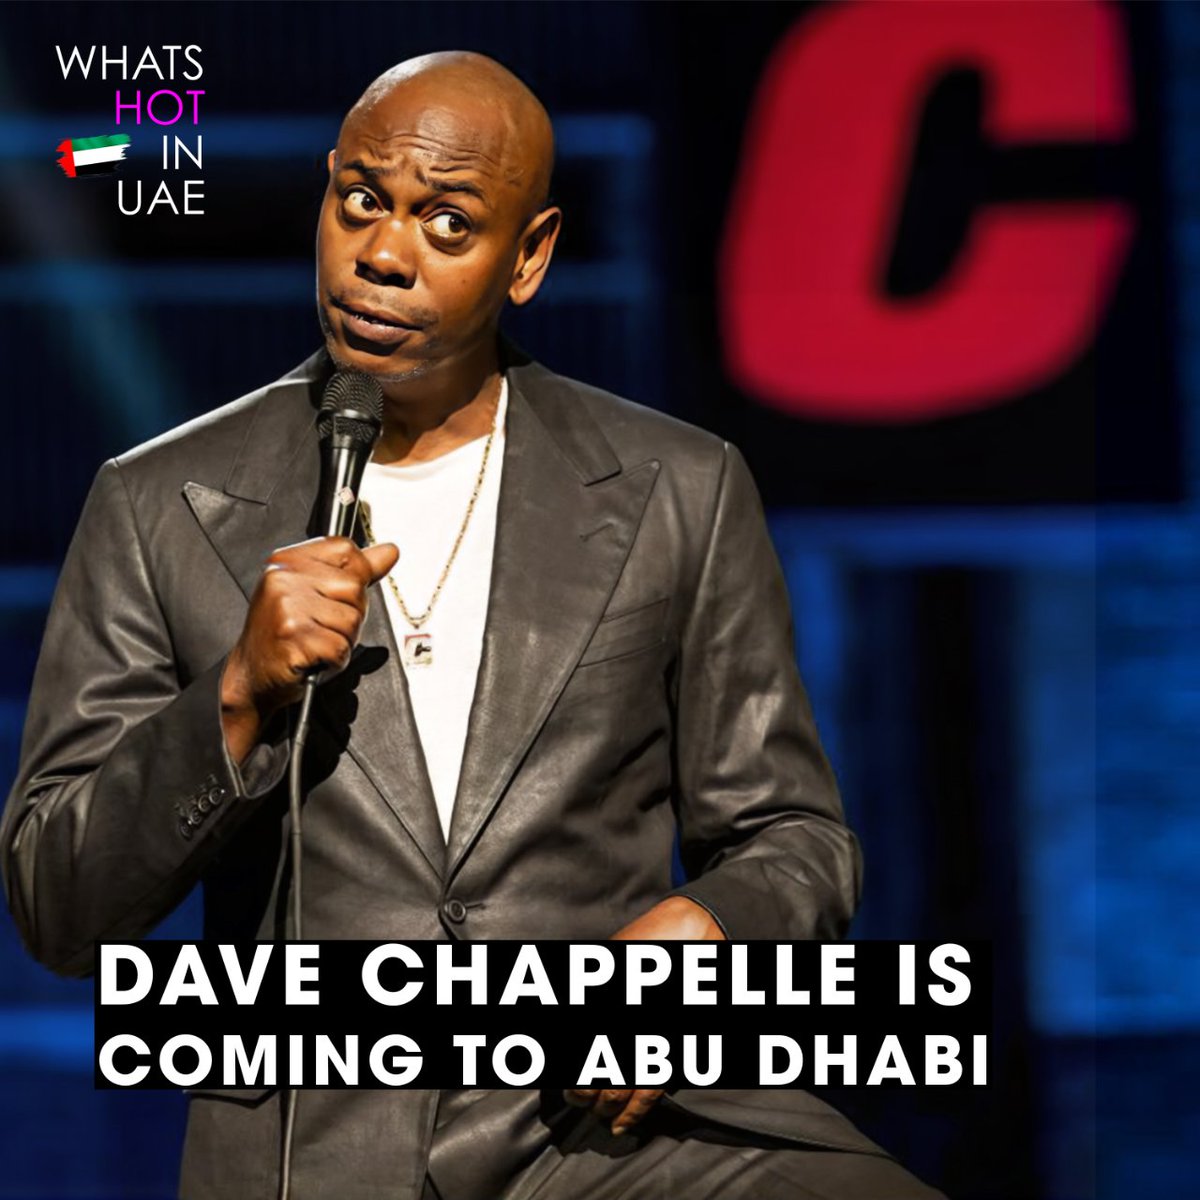 📍 Etihad Arena, Abu Dhabi
🗓 18th to 26th May

Dave Chappelle Live at Abu Dhabi Comedy Week, Etihad Arena, Yas Island, Abu Dhabi, May 23, ticket pre-sale April 22 at 10am, general sale April 23 at 10am. livenation.me, @ADComedyWeek @LiveNationME